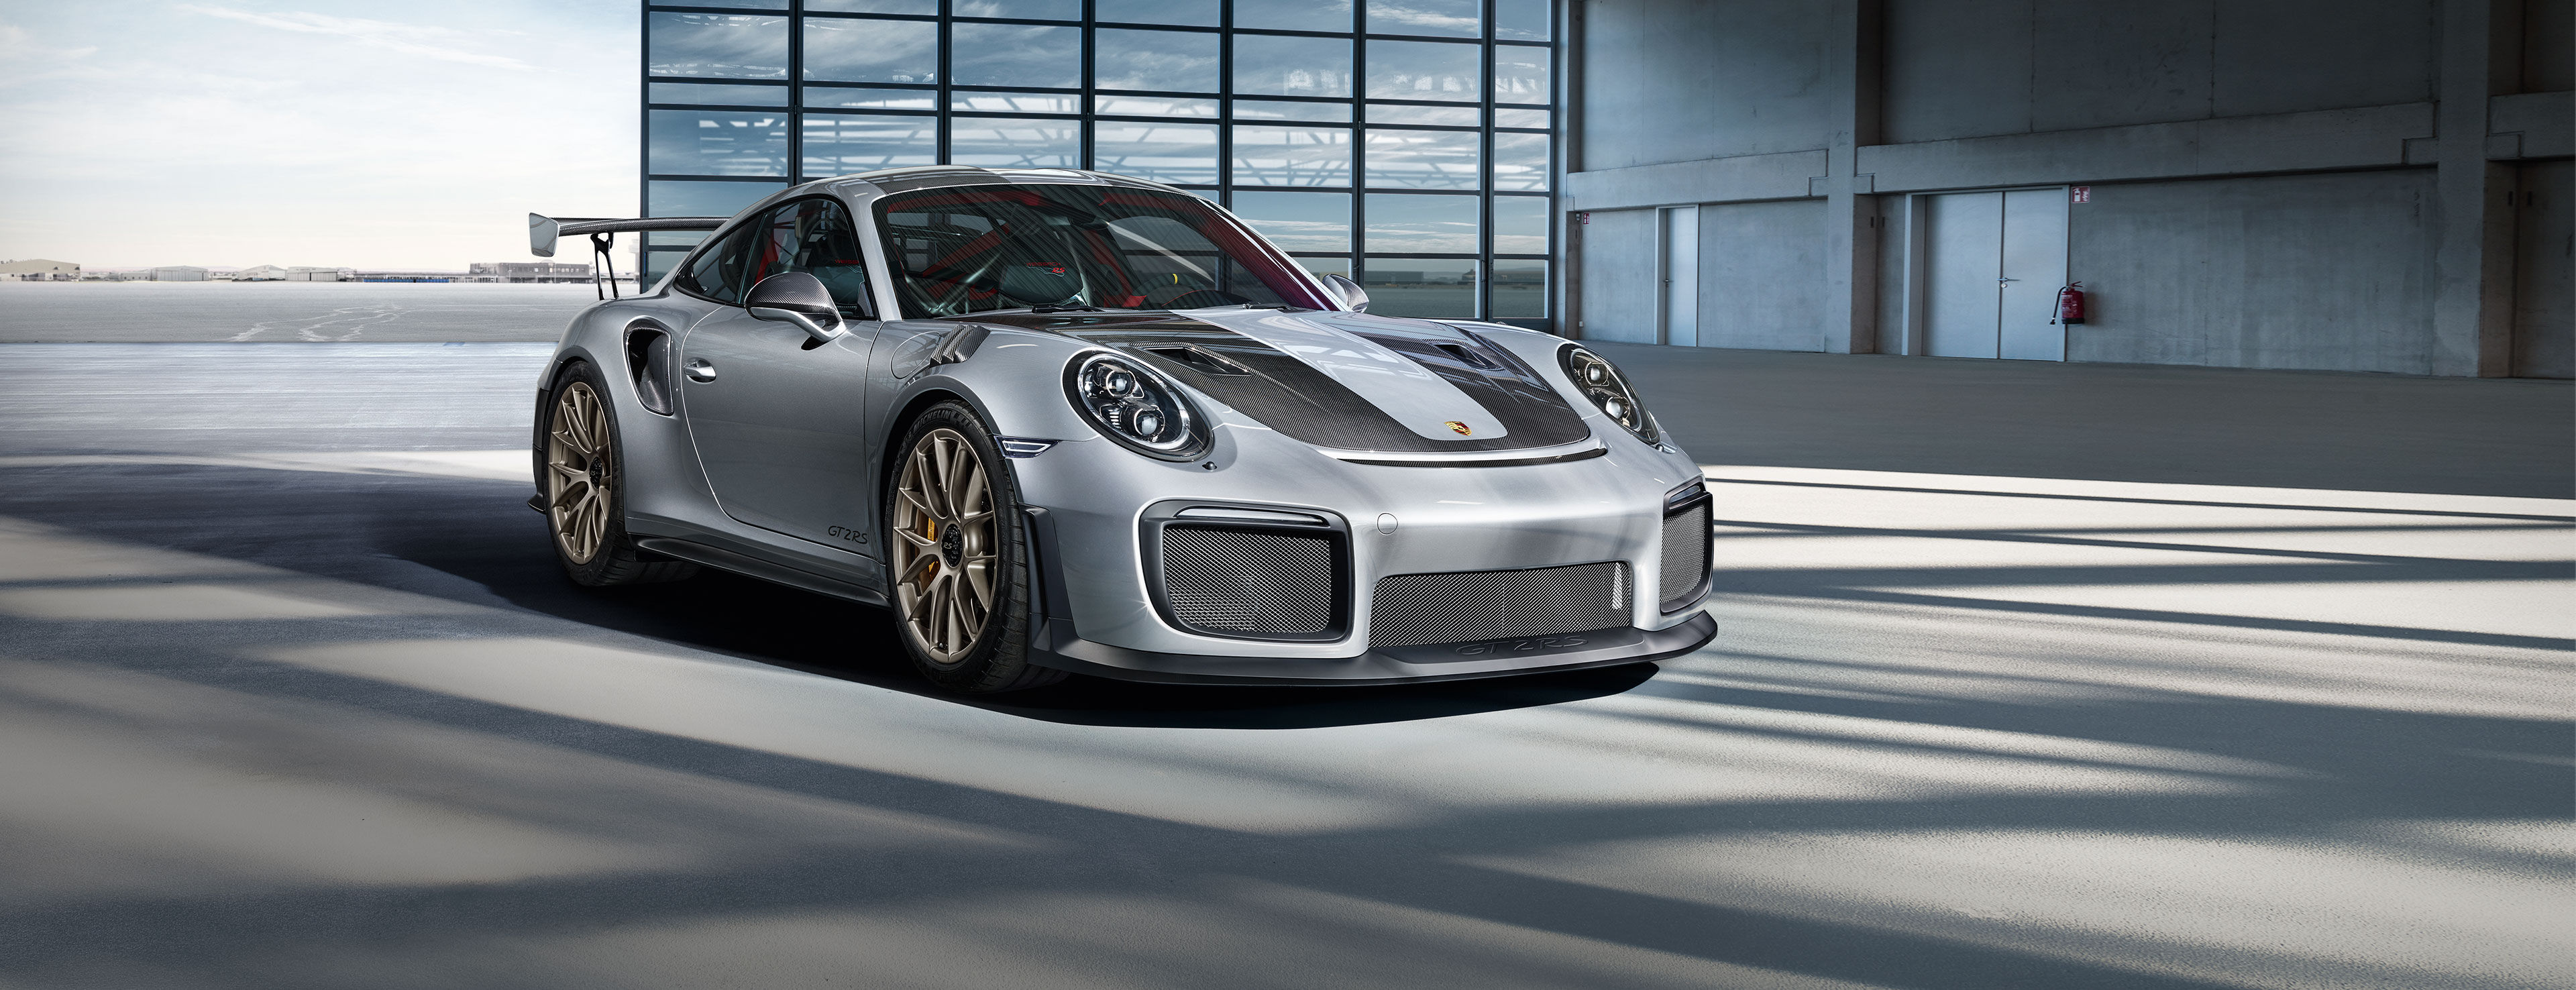 The iconic Porsche 911 GT2 RS returns after a six-year hiatus